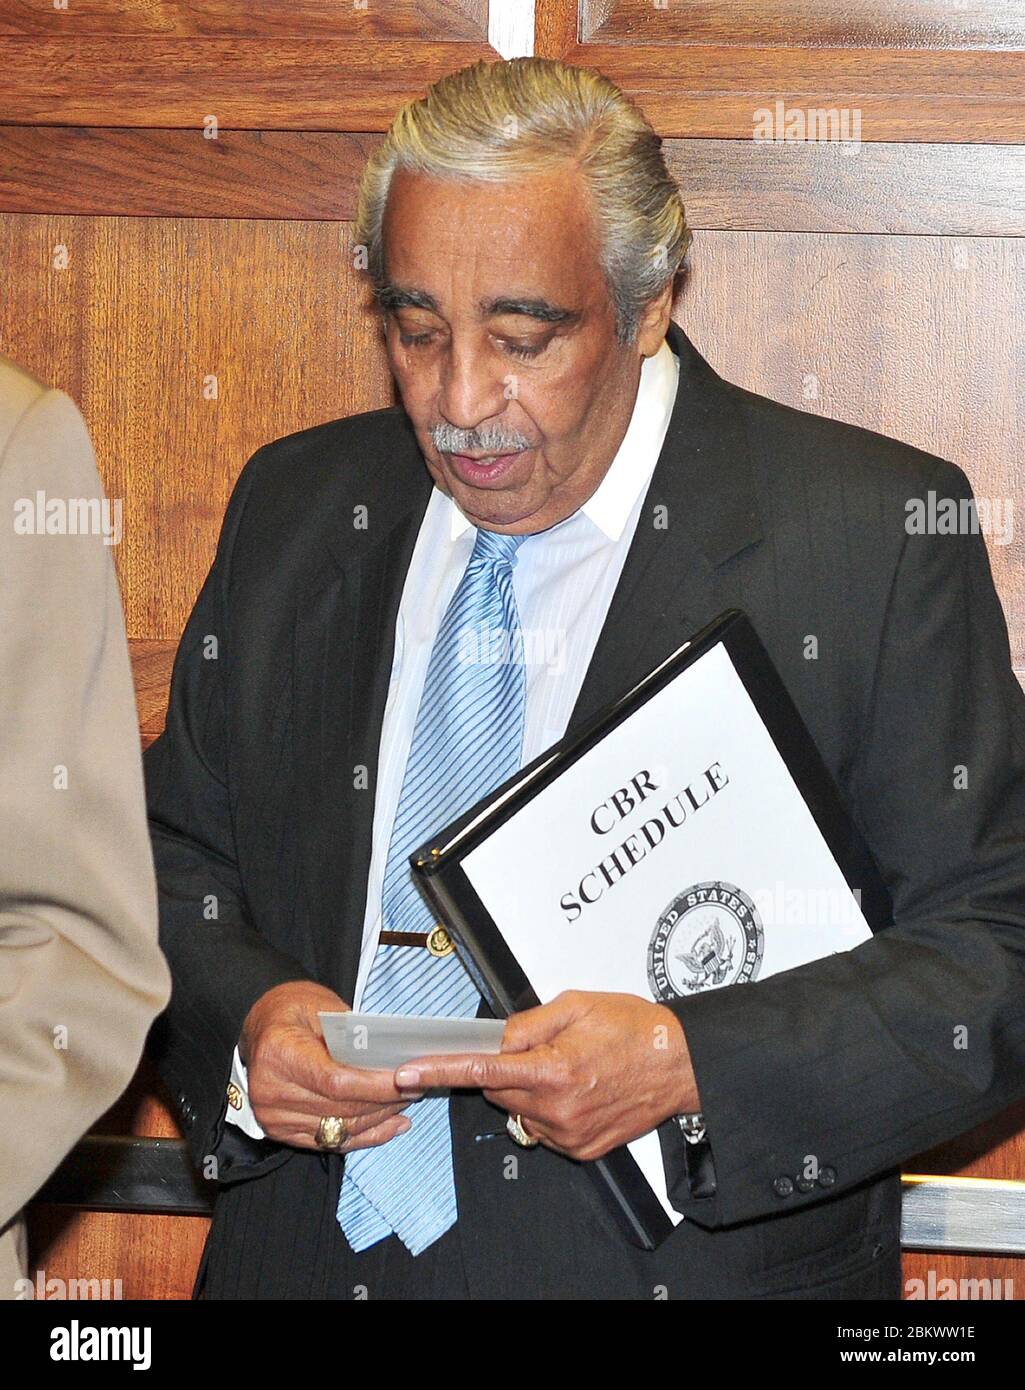 United States Representative Charlie Rangel (Democrat of New York) reads some notes in an elevator near at his Capitol Hill office on Wednesday, December 1, 2010.Credit: Ron Sachs / CNP  (RESTRICTION: NO New York or New Jersey Newspapers or newspapers within a 75 mile radius of New York City) / MediaPunch Stock Photo